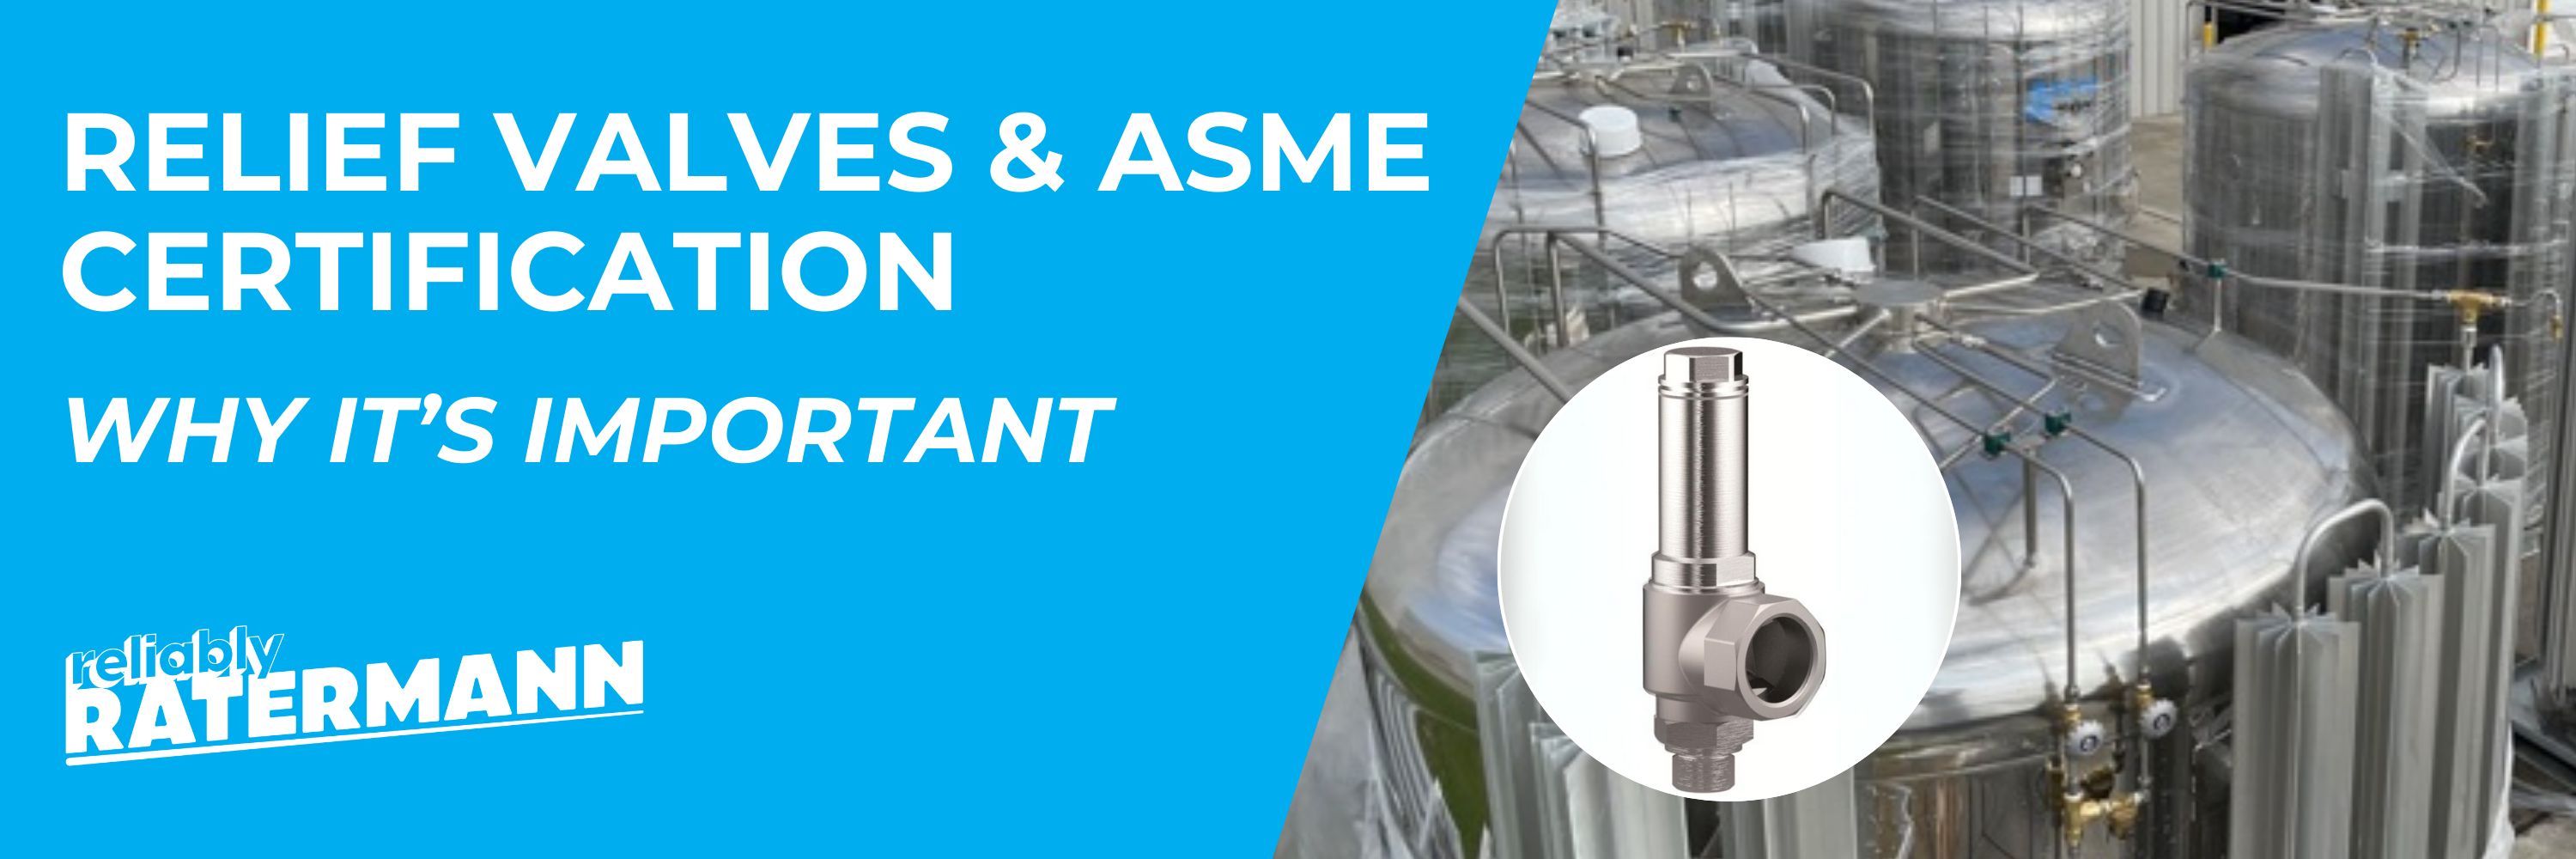 Relief Valves & ASME Certification: Why It's Important